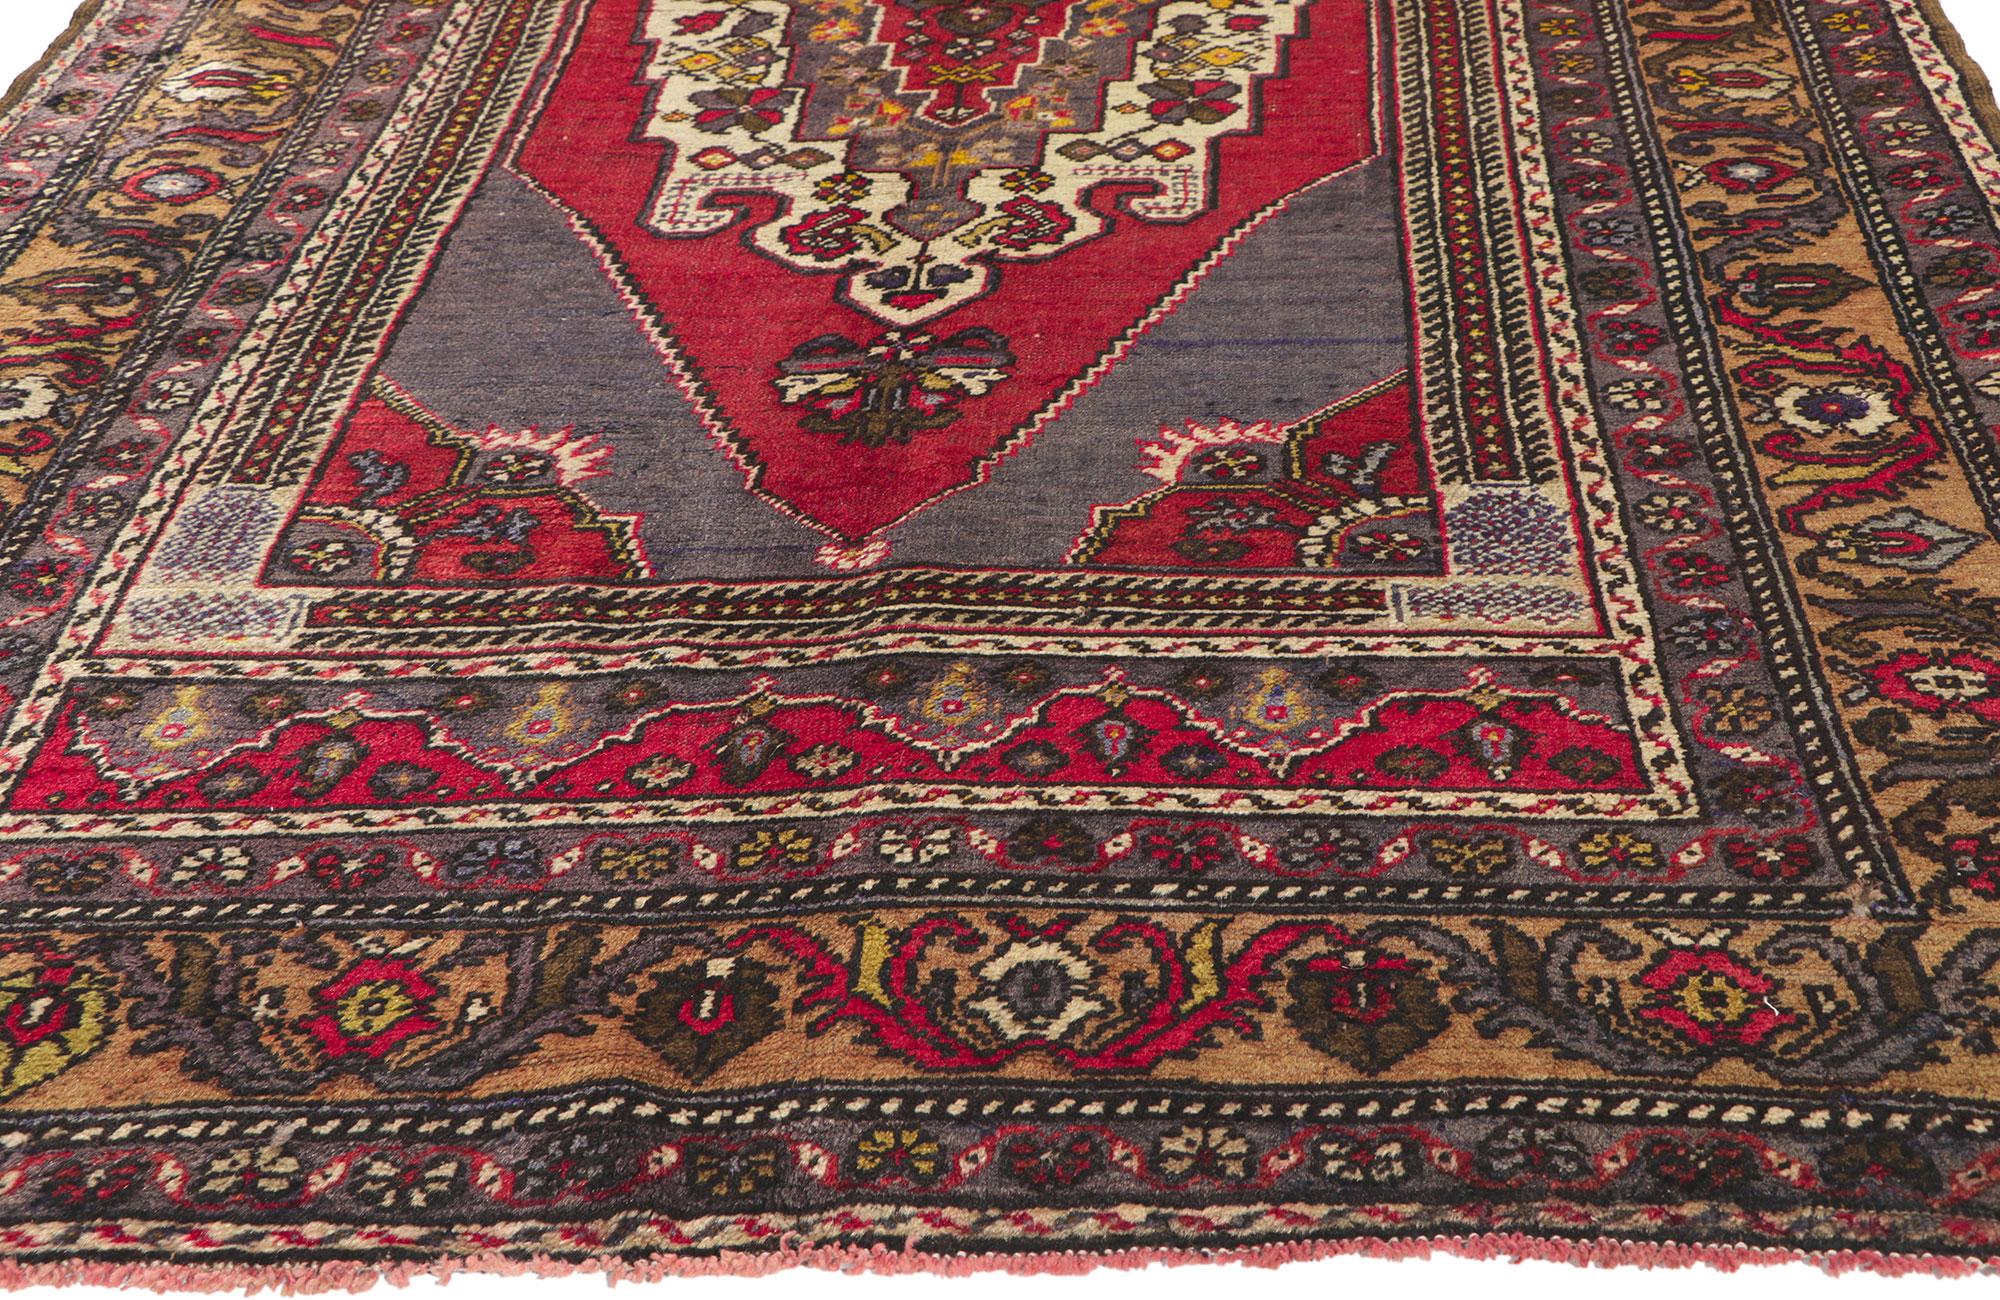 Vintage Turkish Oushak Rug with Dusk Sunset Earth-Tone Colors In Good Condition For Sale In Dallas, TX